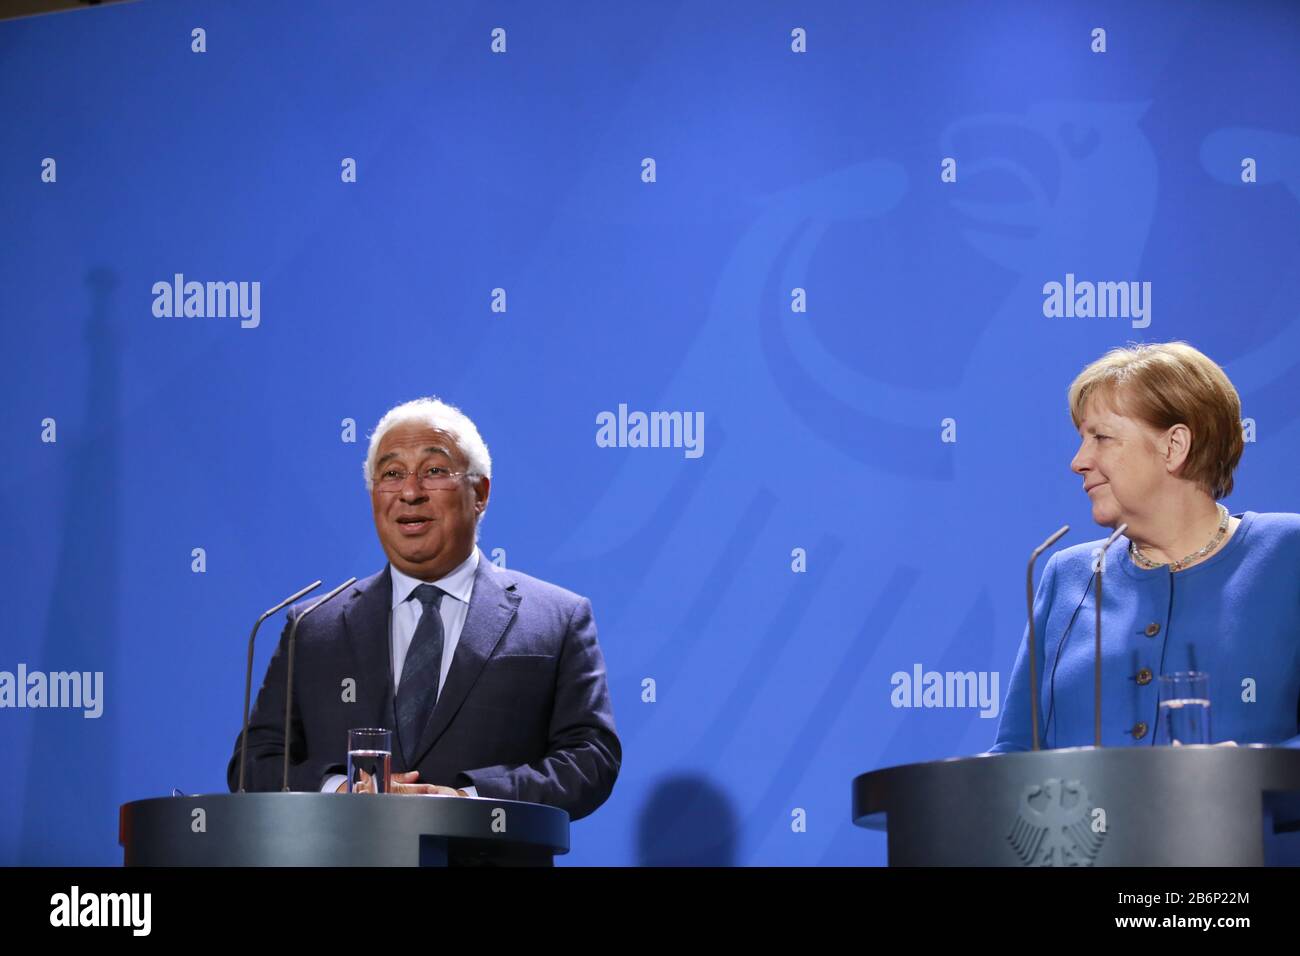 03/11/2020, Berlin, Germany, Chancellor Angela Merkel welcomes António Costa, Prime Minister of Portugal in the Chancellery. Stock Photo